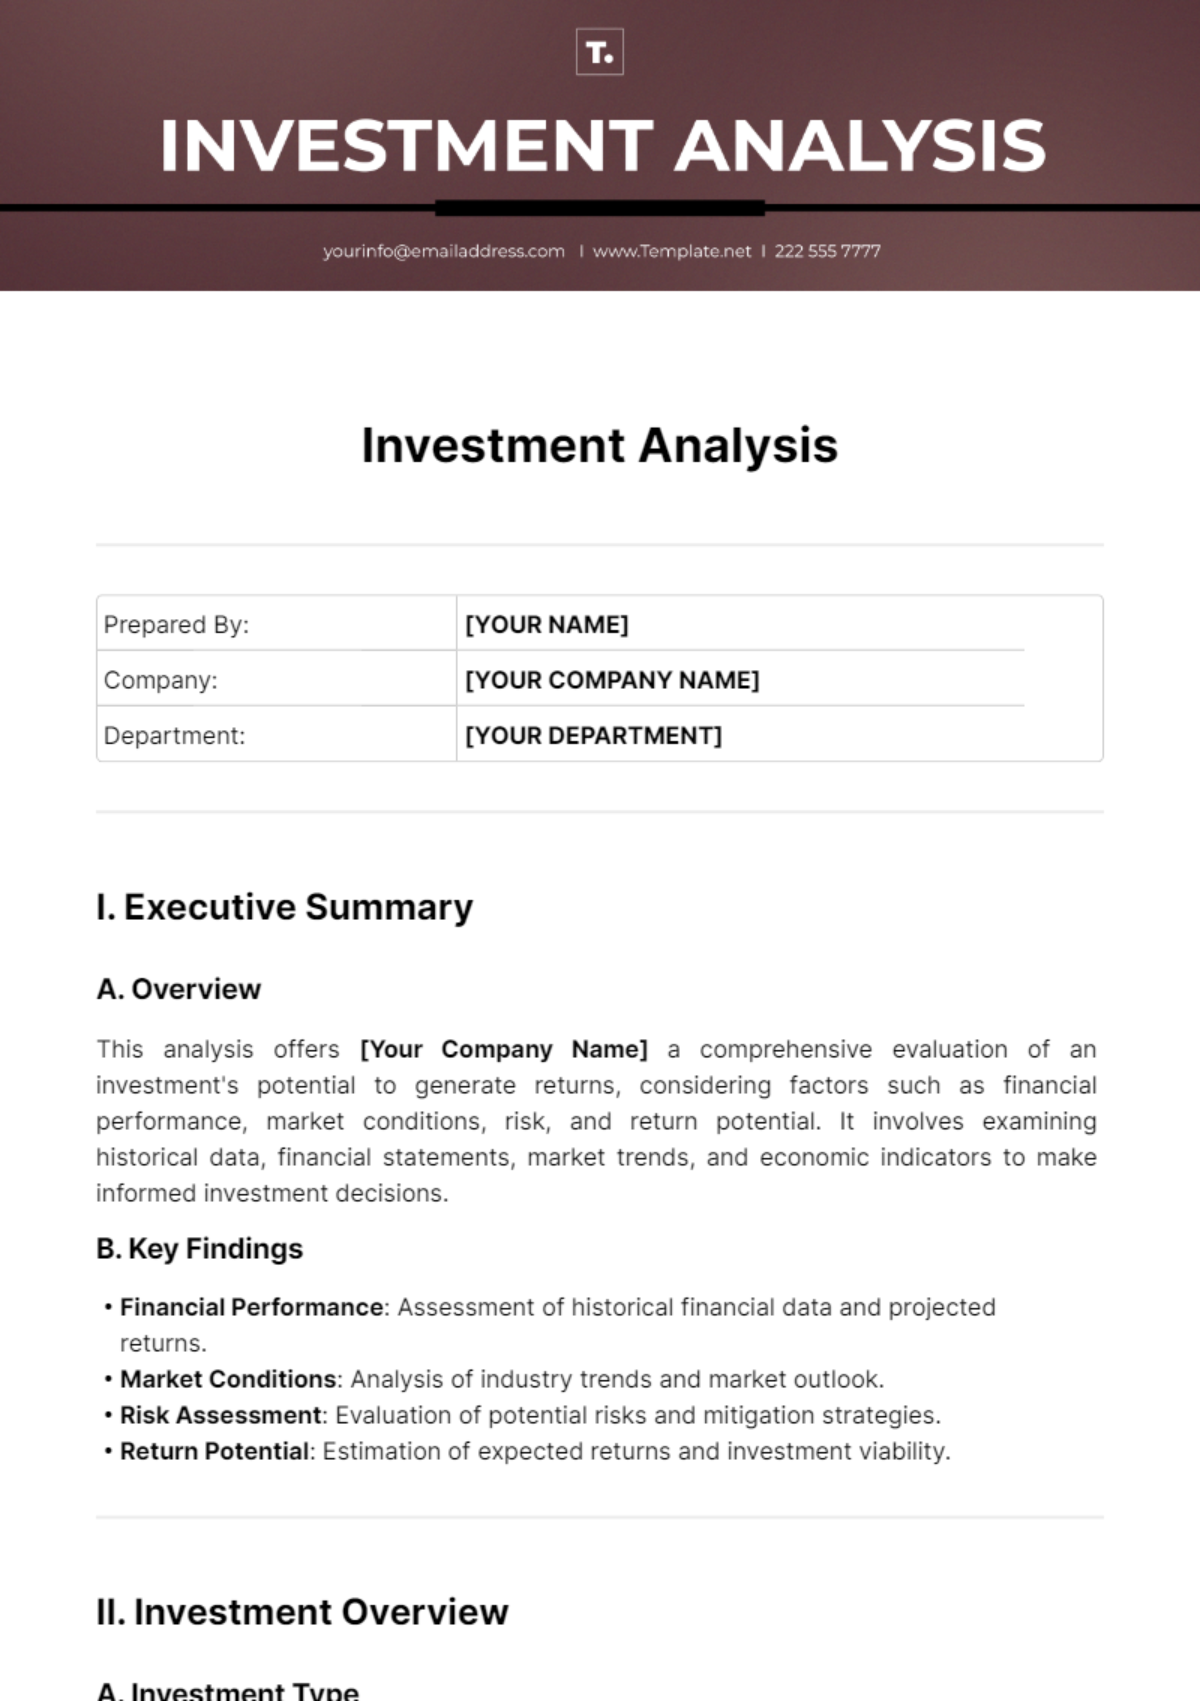 Investment Analysis Template